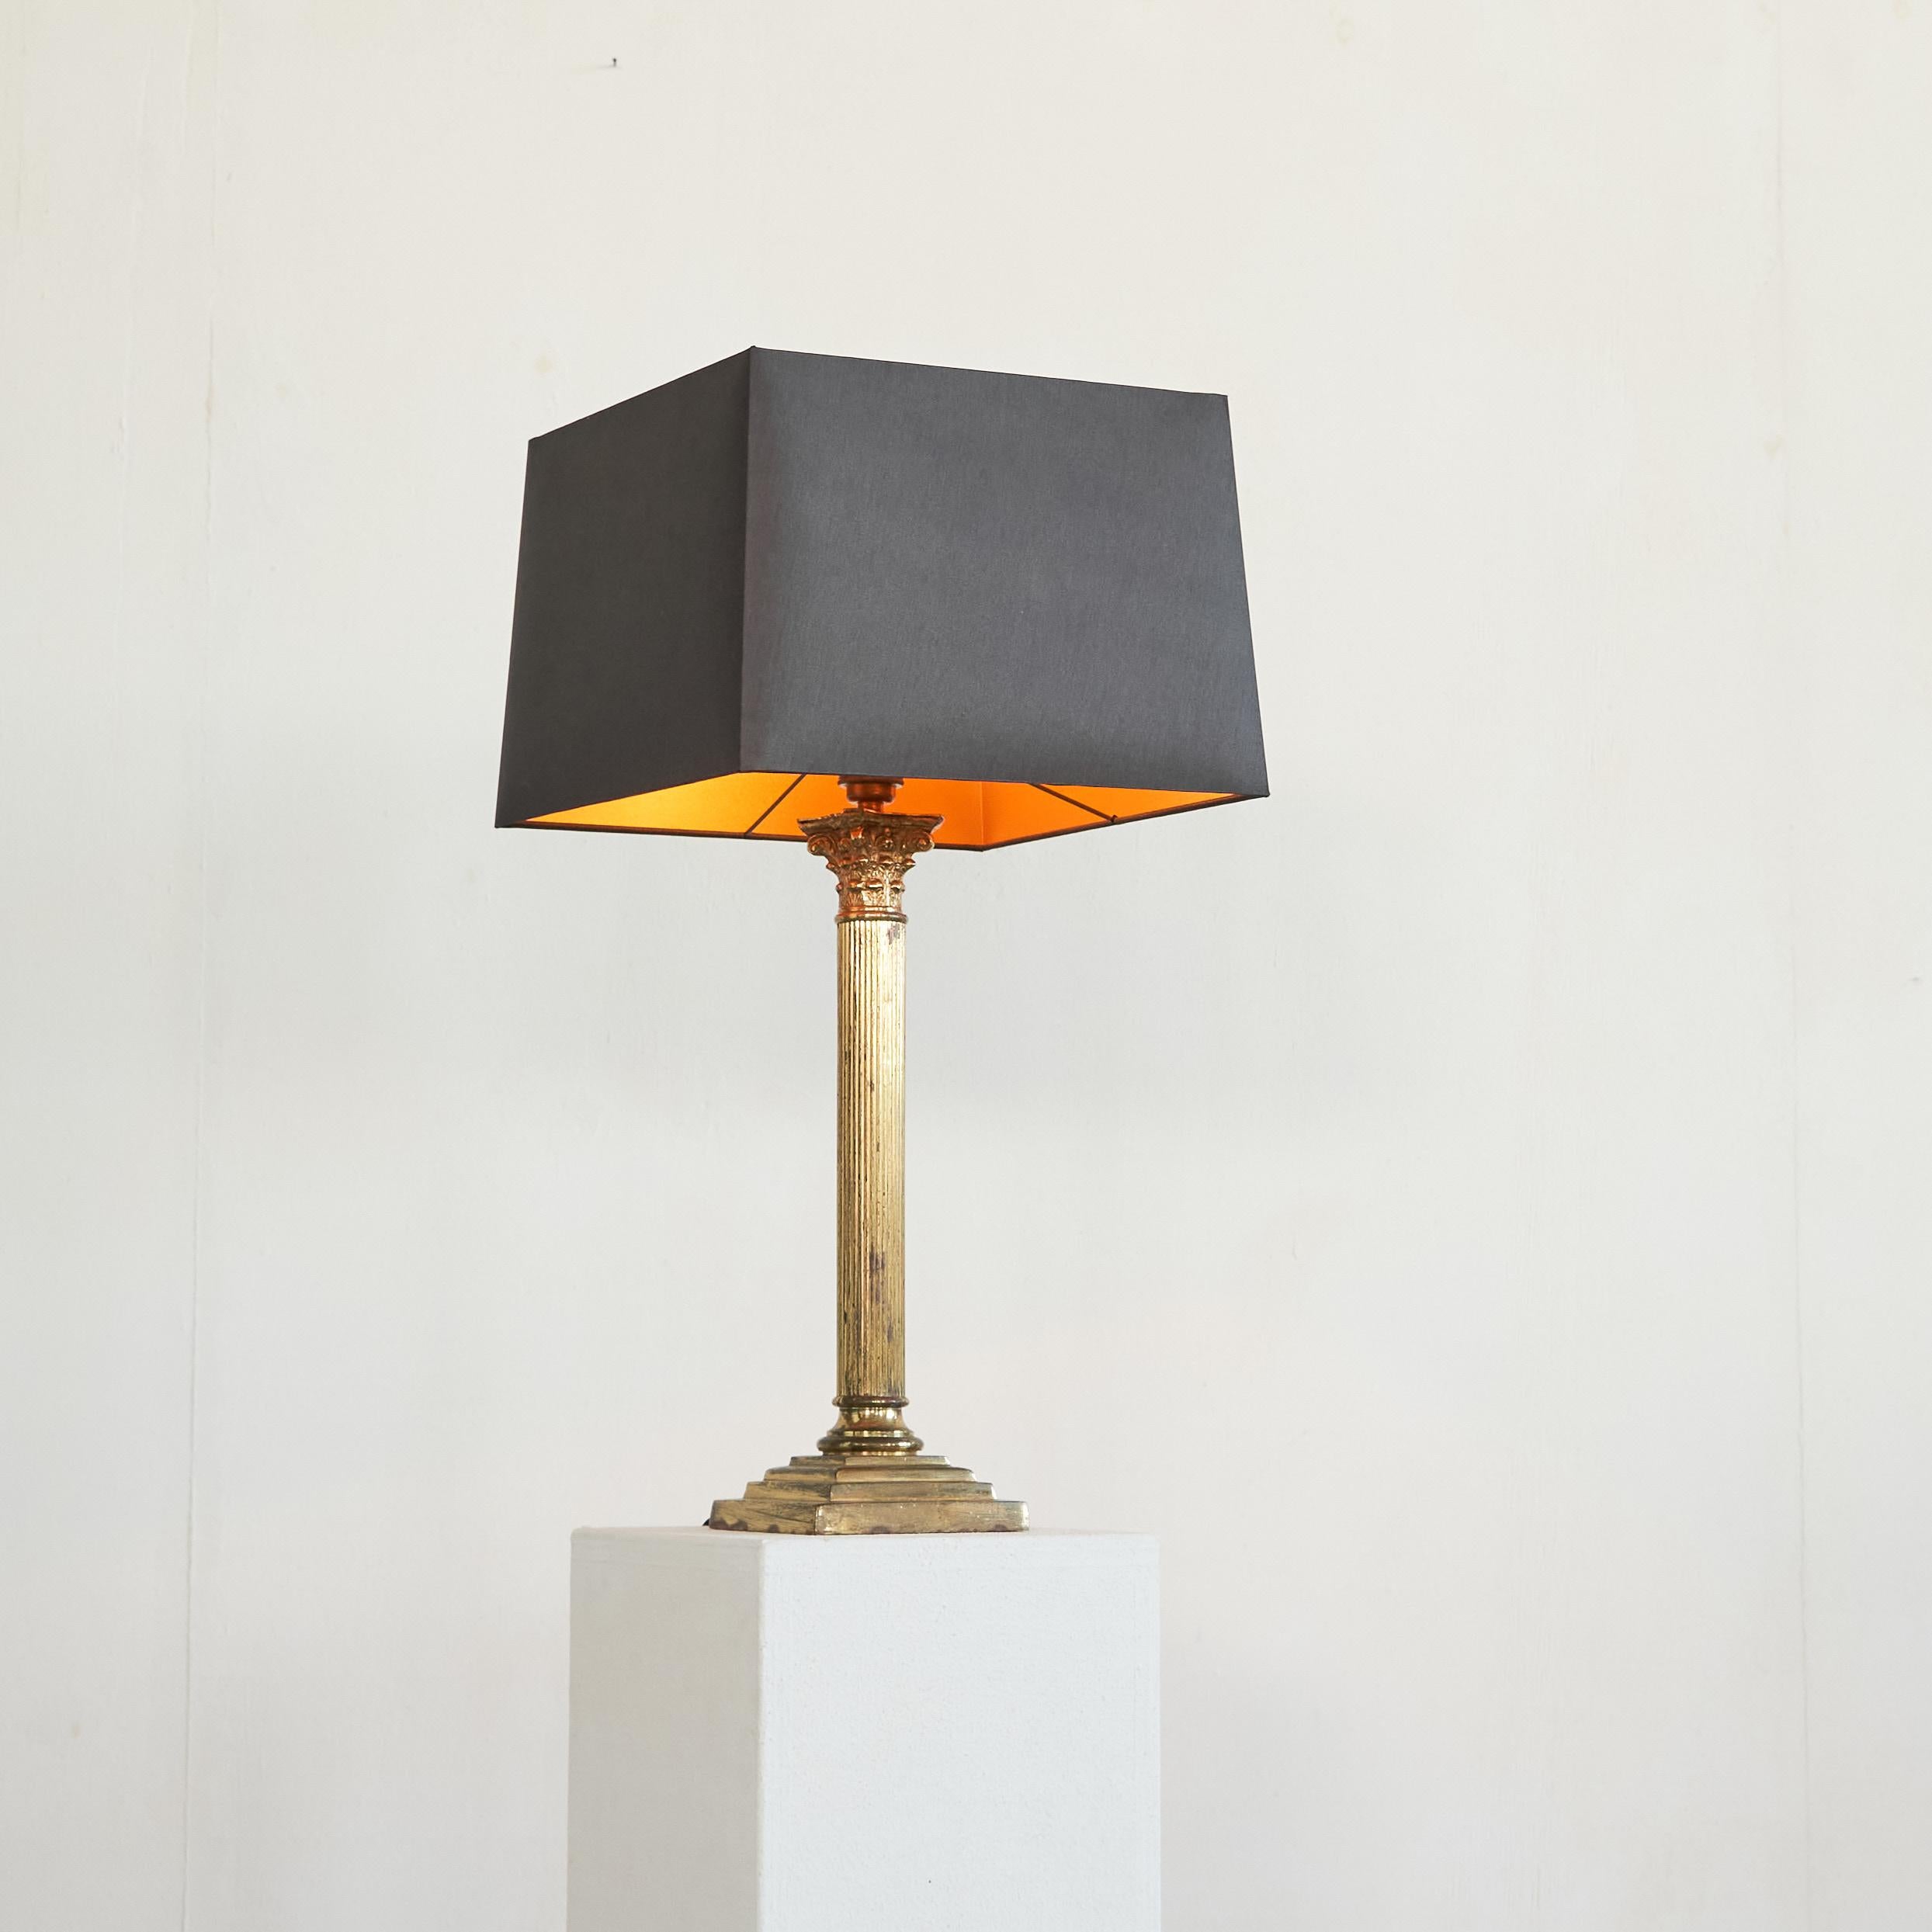 Antique Neoclassical Column Table Lamp in Patinated Brass.

Converted from an antique oil lamp, this neoclassical column table lamp is a heavy and beautifully patinated piece. Great proportions and execution in brass, which gained a wonderful patina